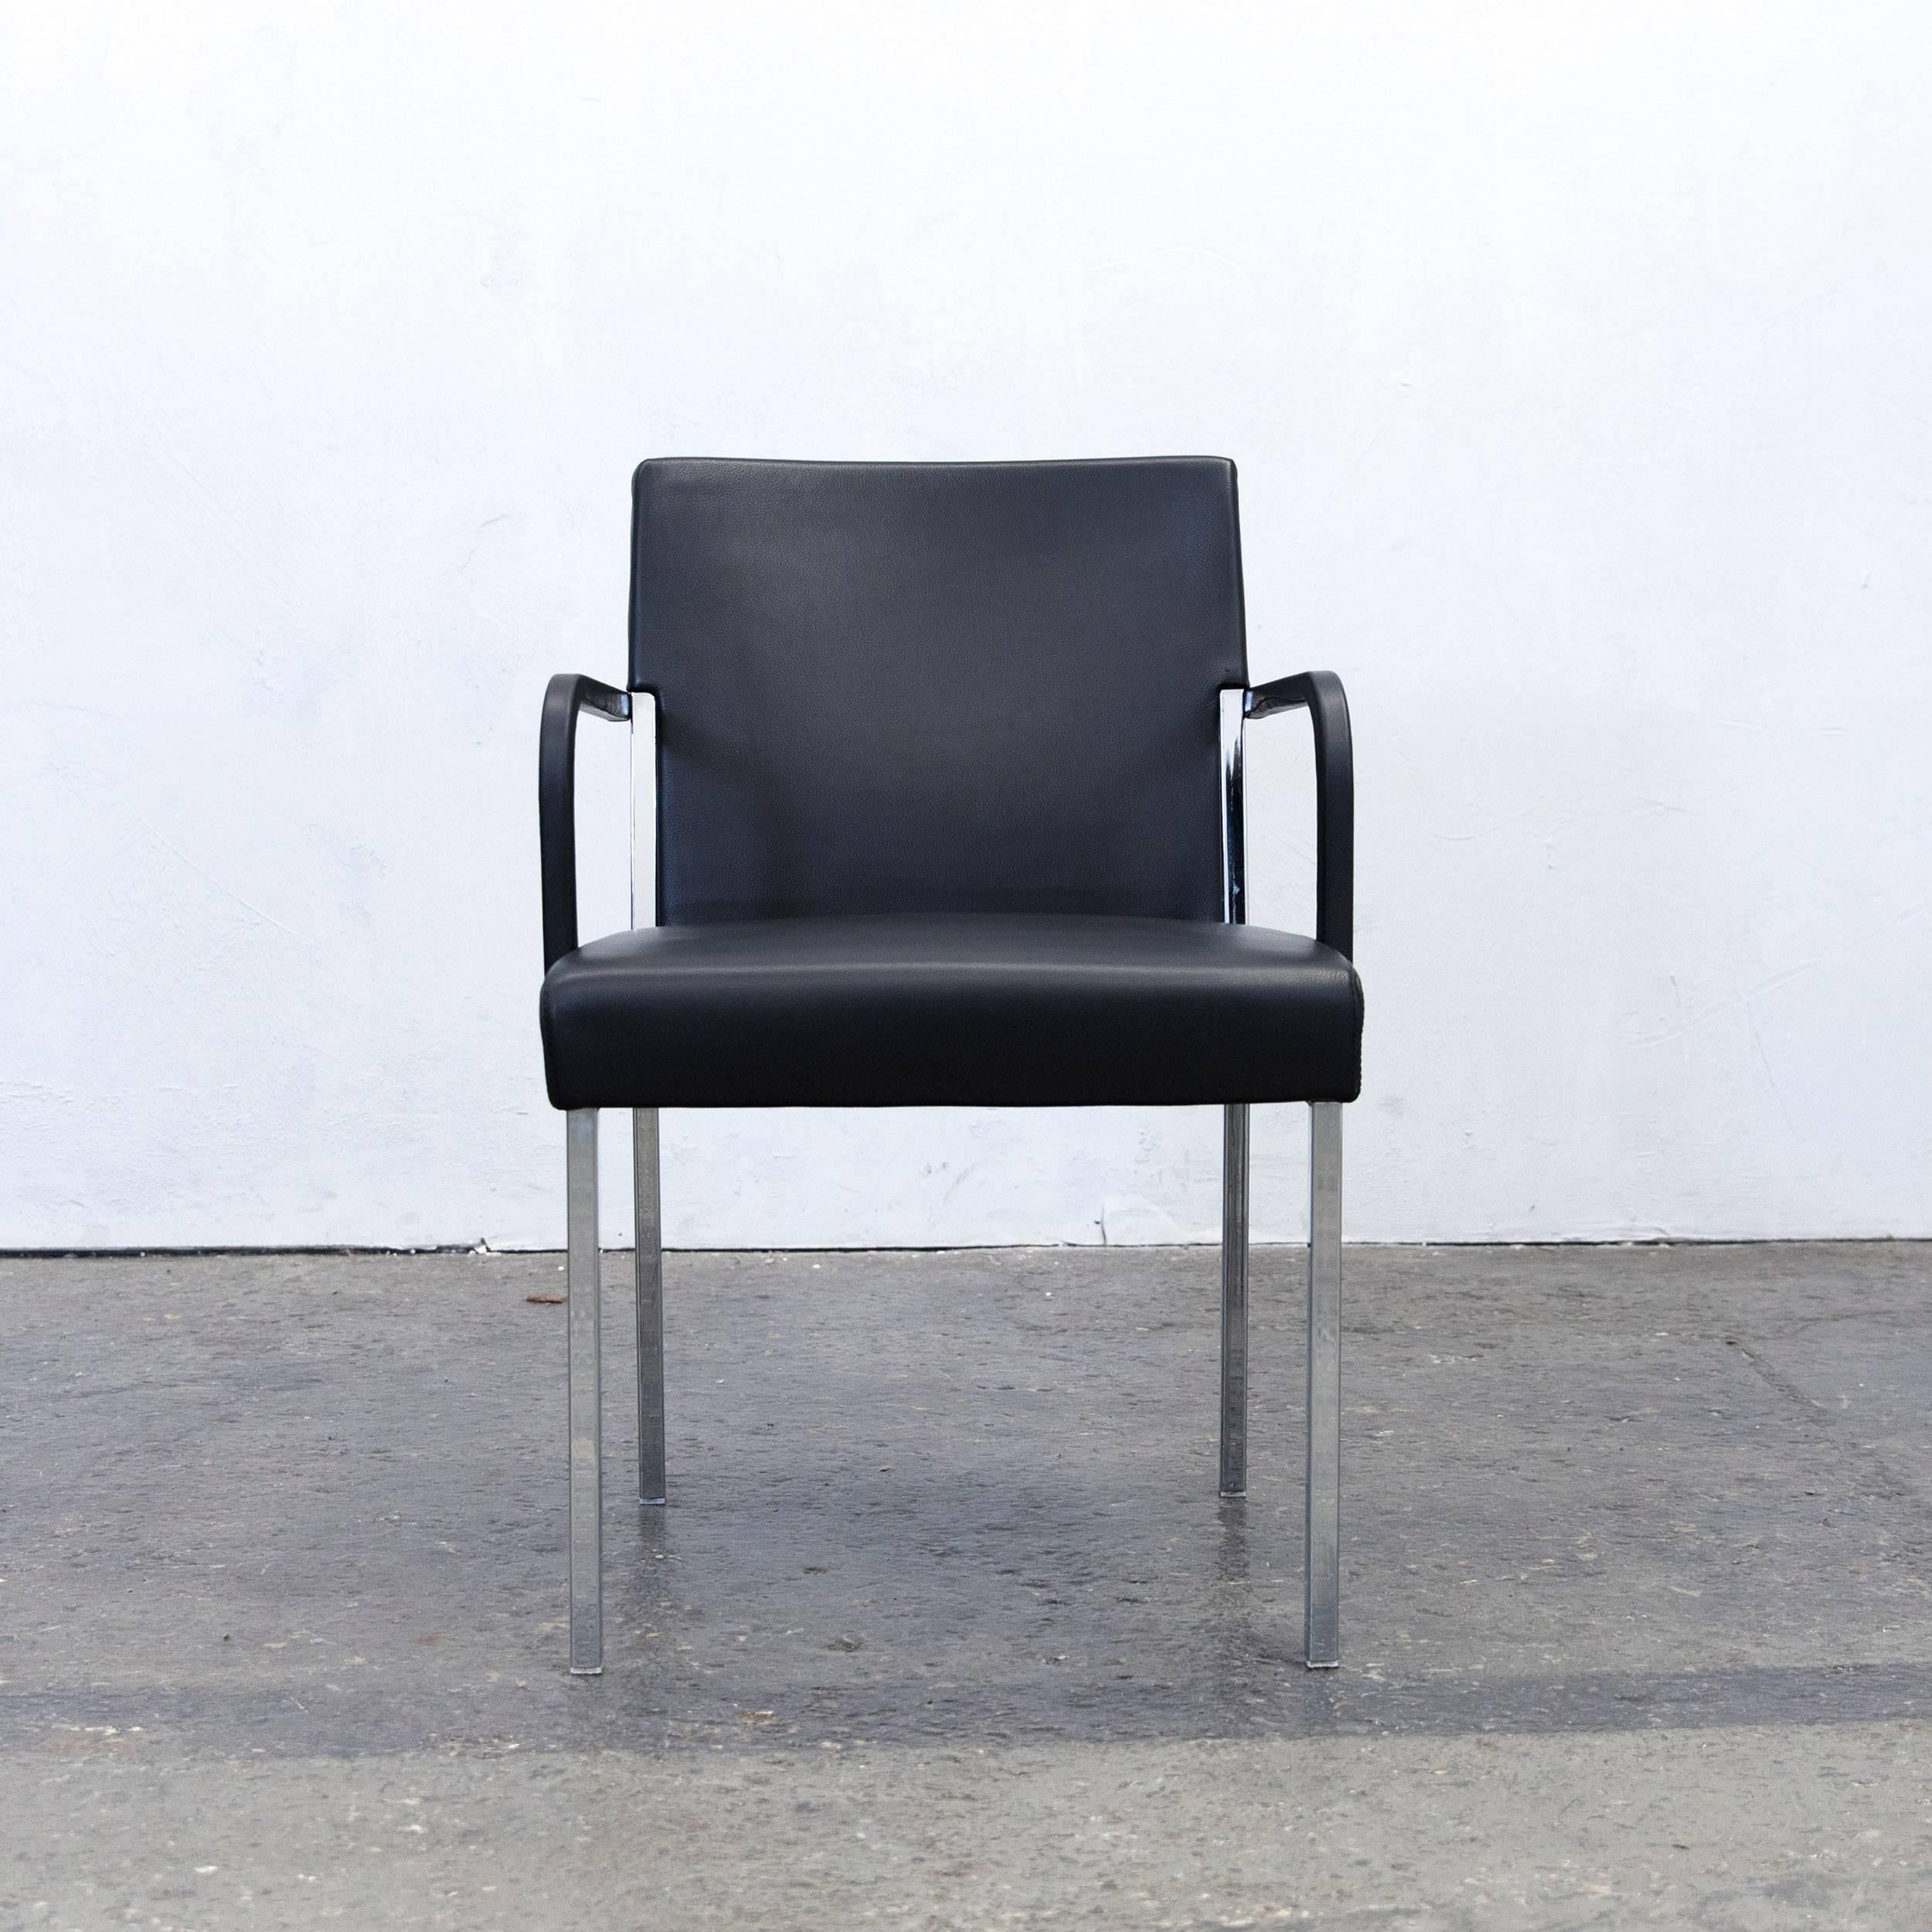 Black colored original Moroso designer leather armchair, in a minimalistic and modern design, made for pure comfort and style.